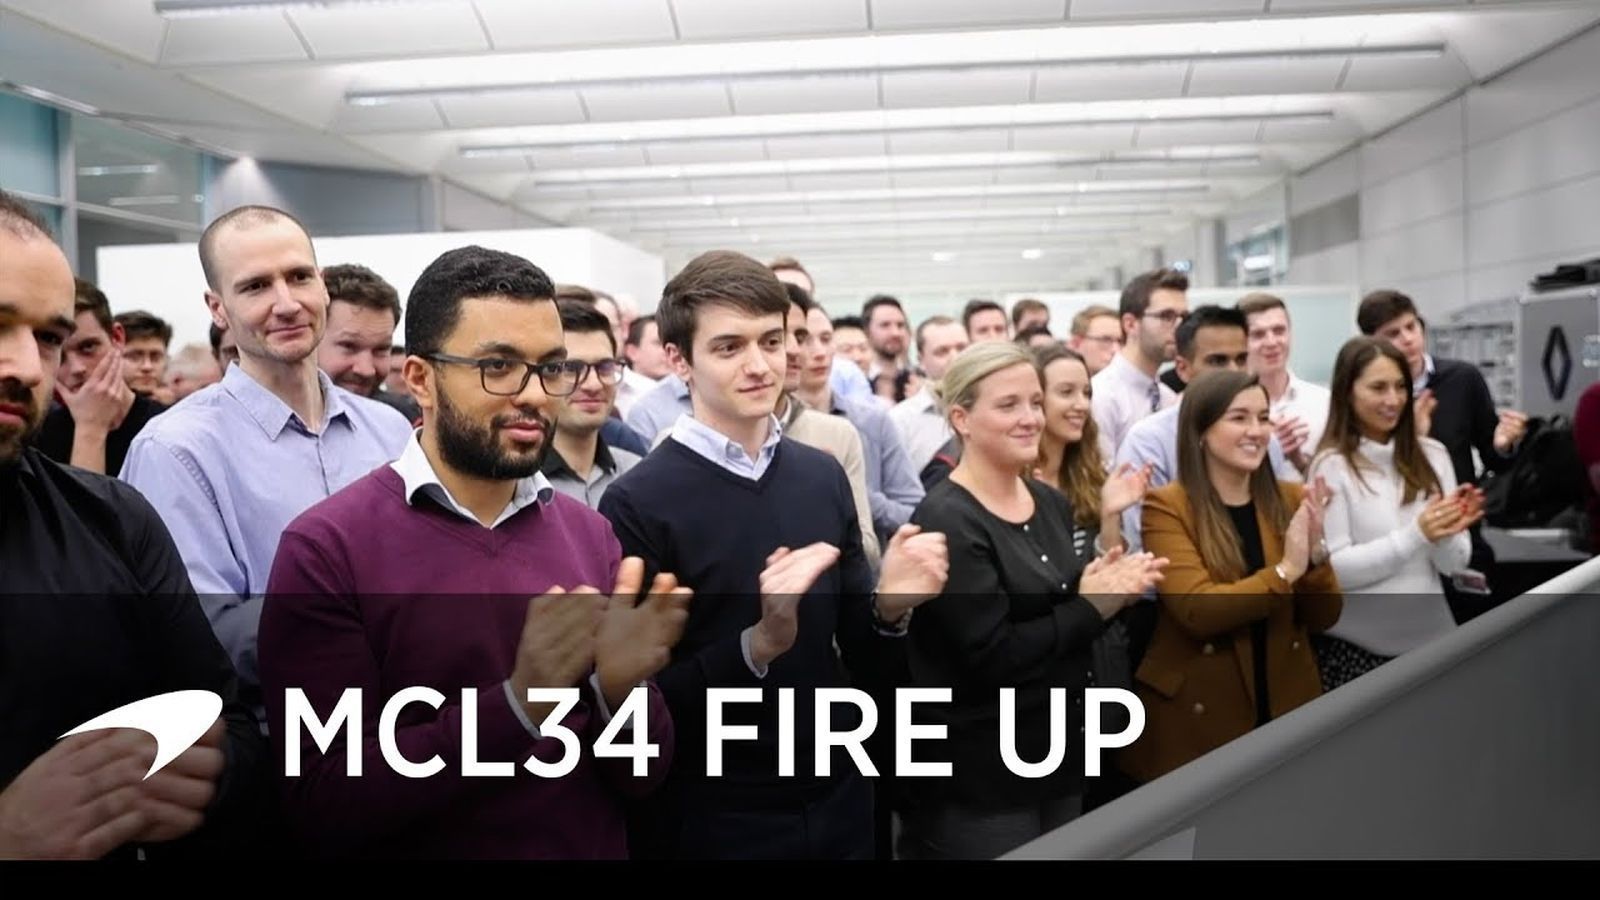 MCL34 fire up